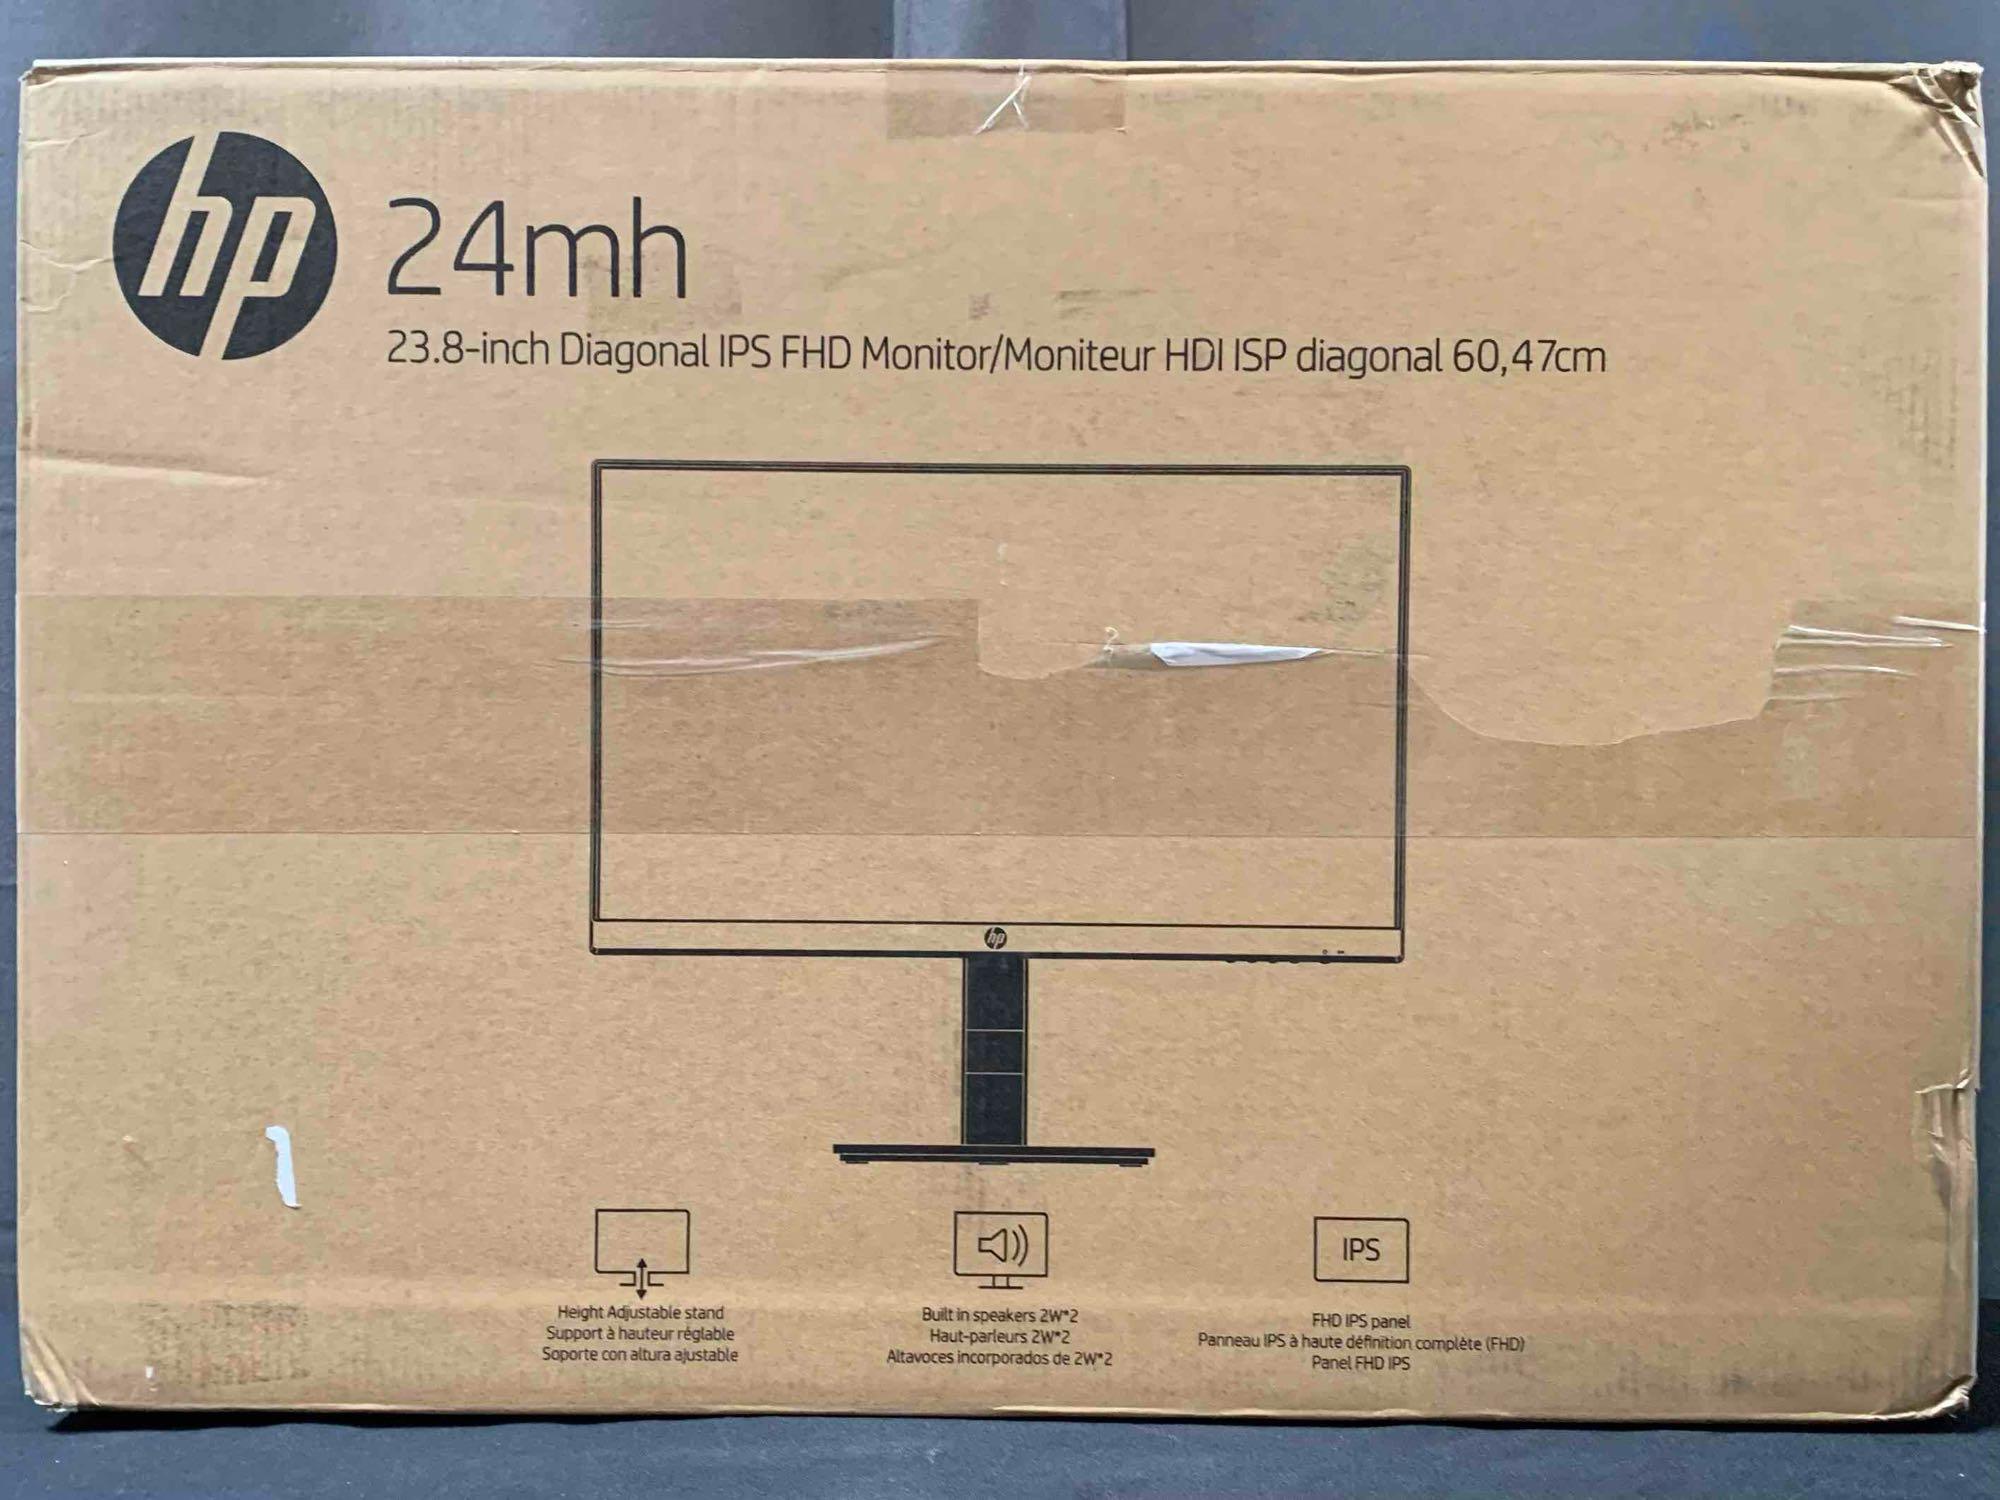 HP 24mh FHD Computer Monitor with 23.8-Inch